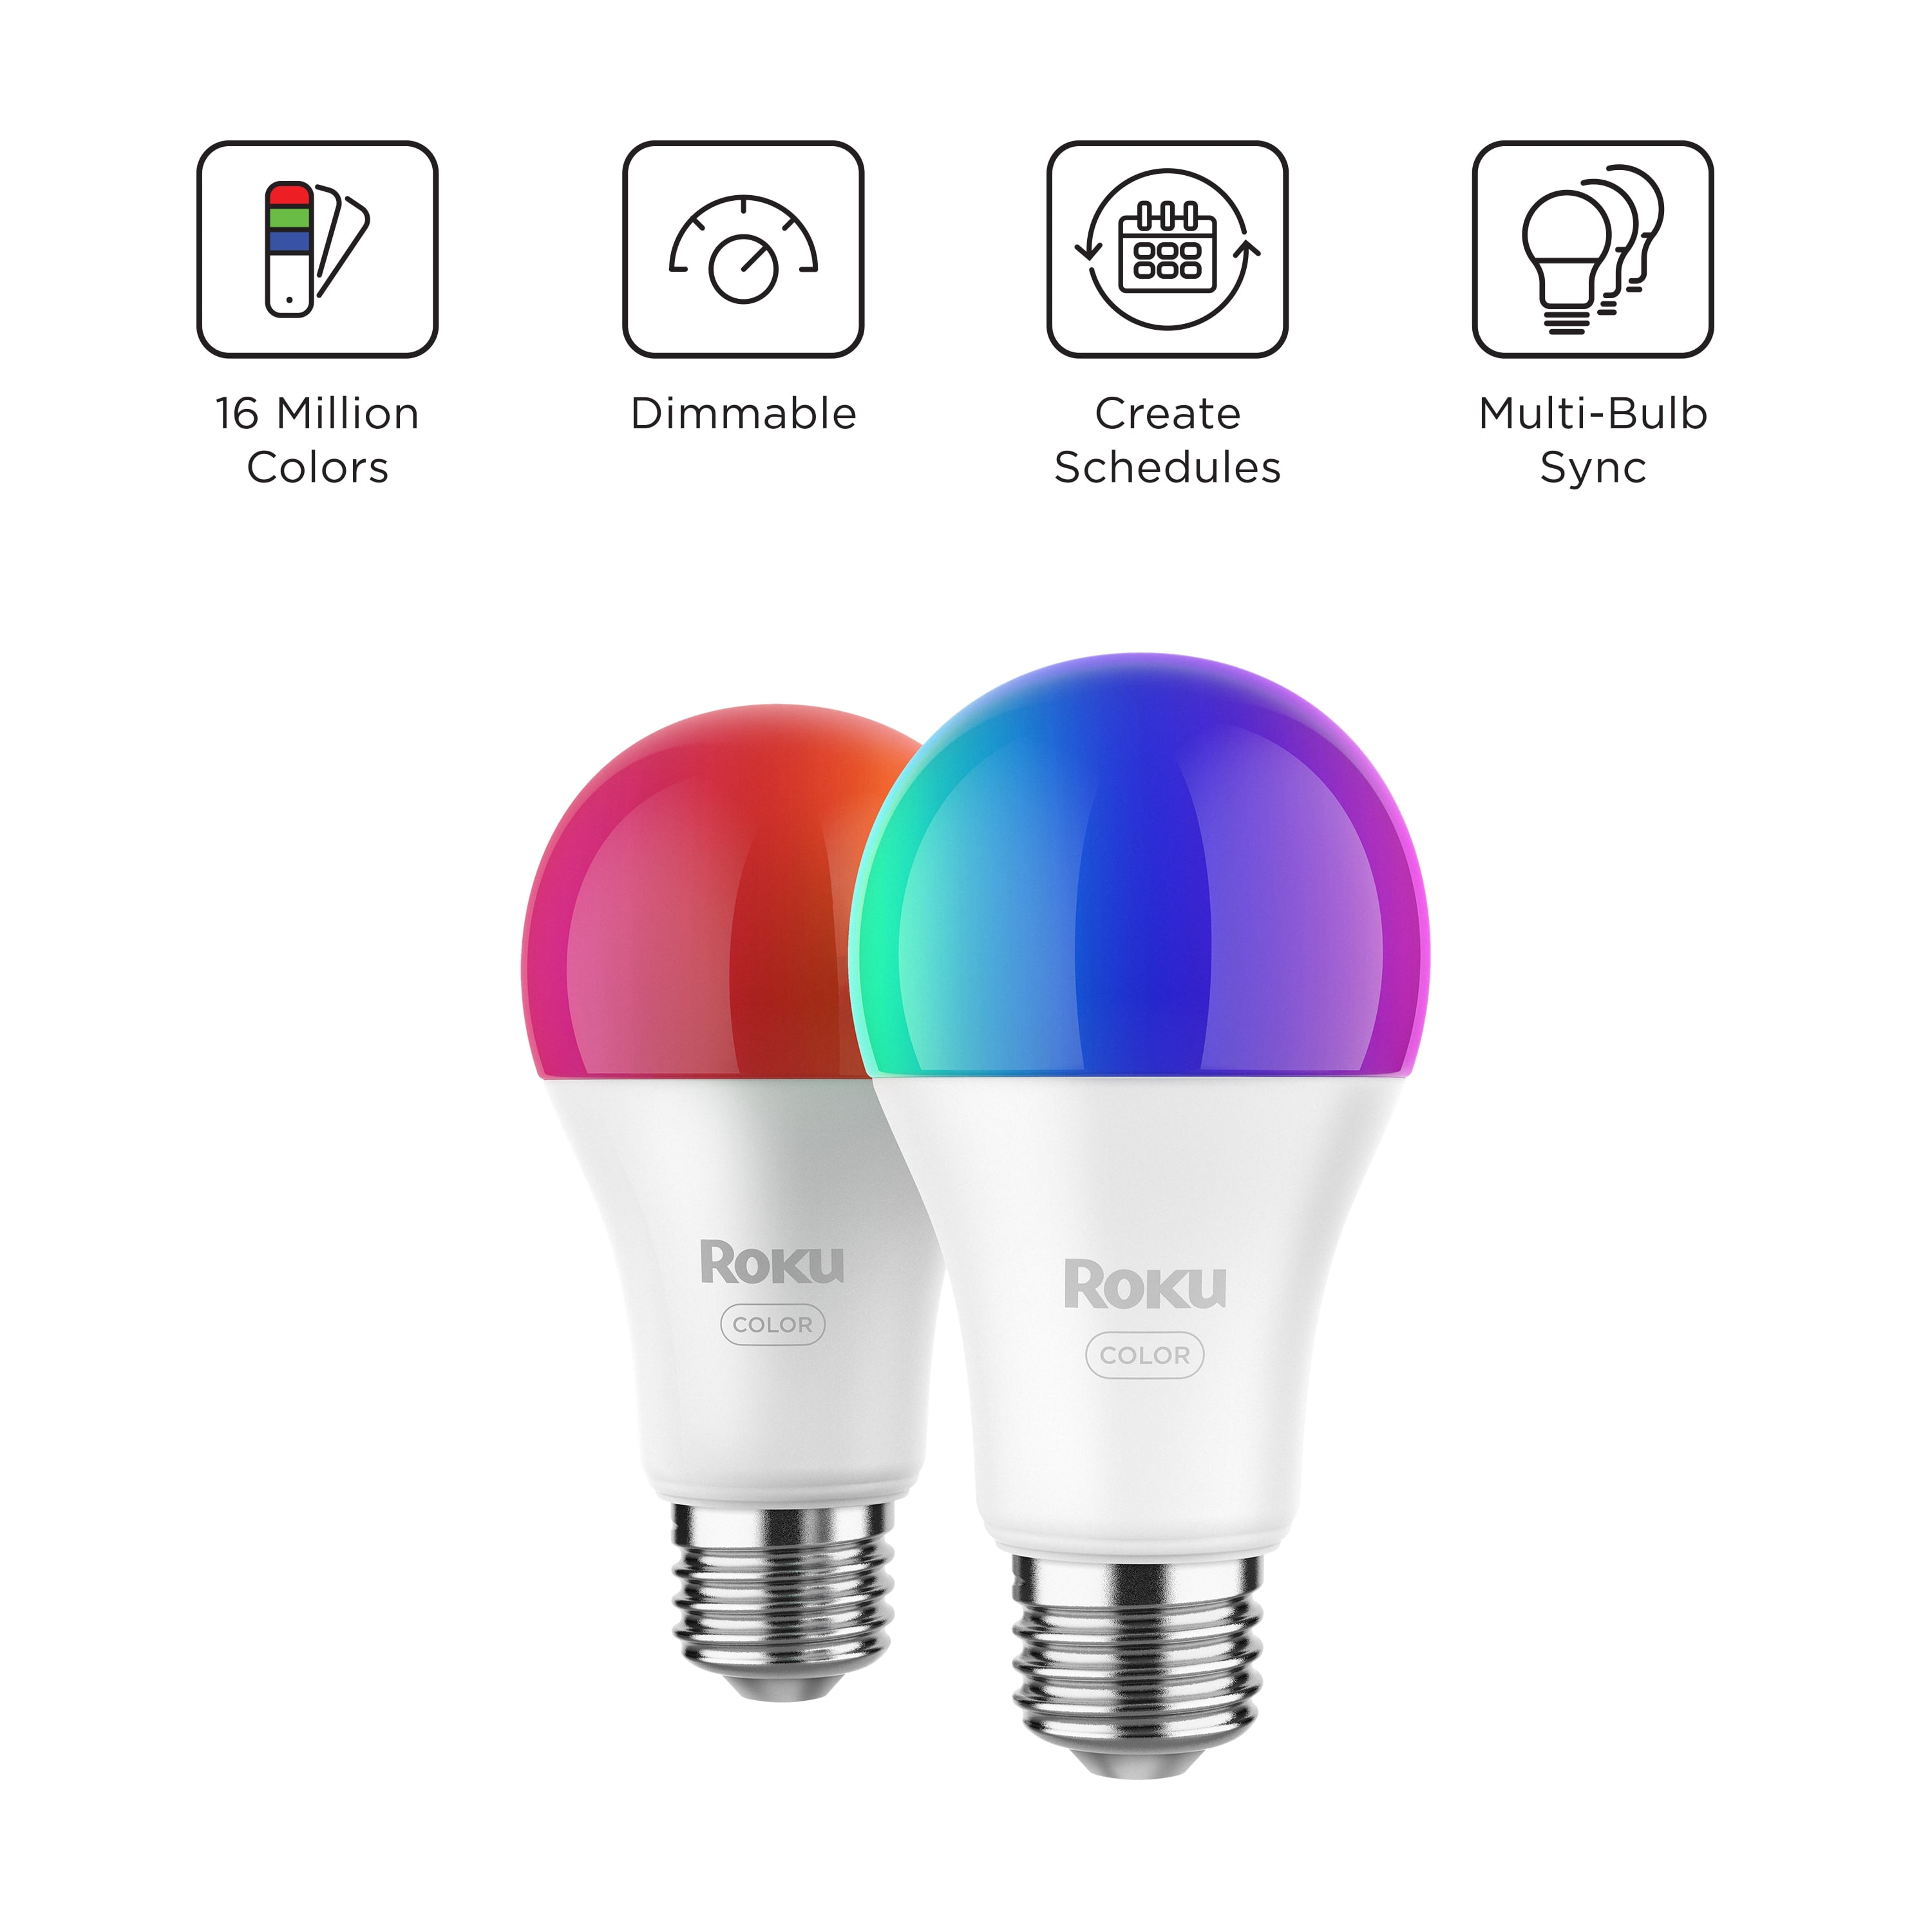 Roku Smart Home Smart Bulb SE (White) 1-Pack with Adjustable Brightness and  Temperature, 9.5 Watts - Screw Base 